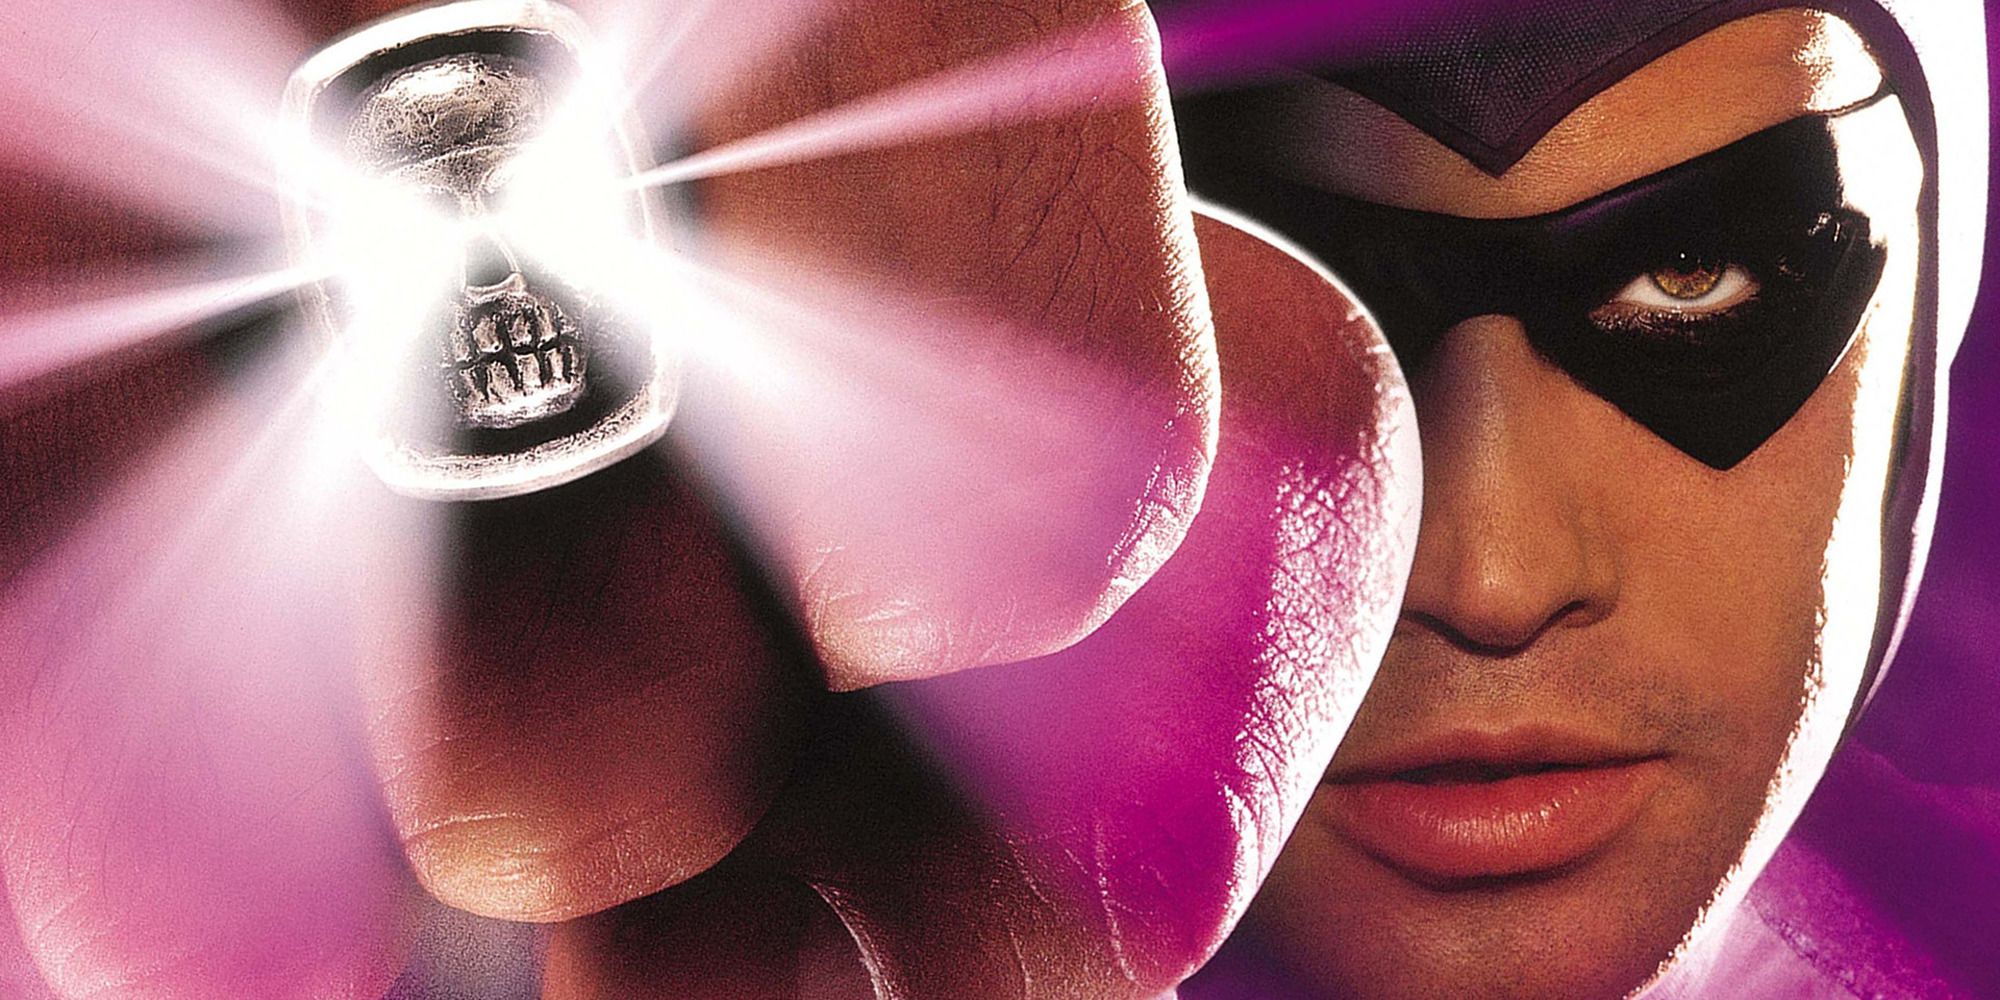 Billy Zane as The Phantom, in costume holding up a glowing skull ring